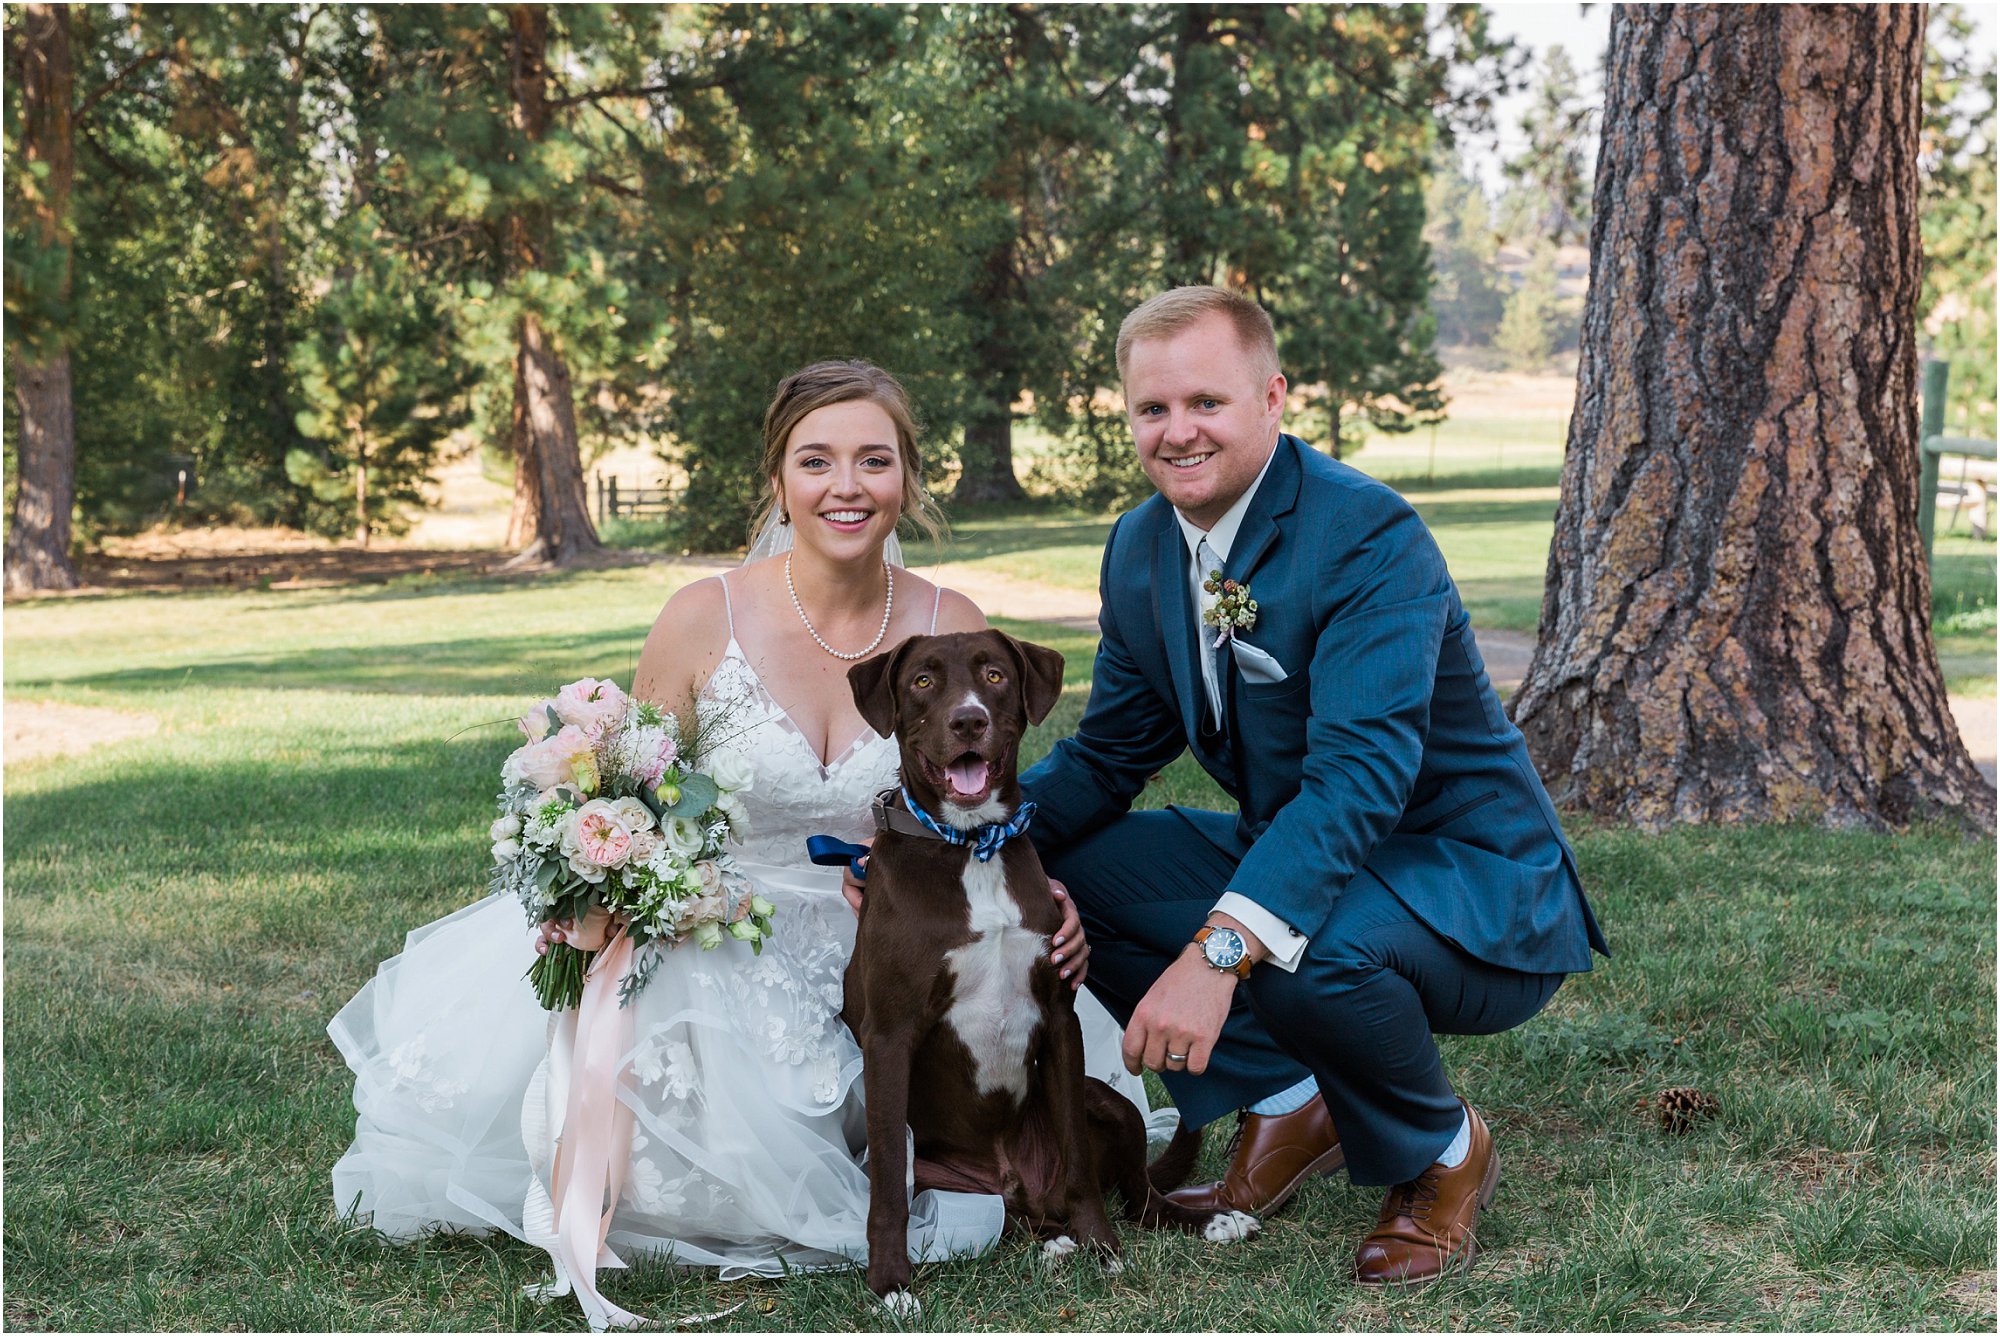 The ringbearer was the couple's dog, so a formal portrait with him was necessary at their outdoor Oregon wedding. | Erica Swantek Photography